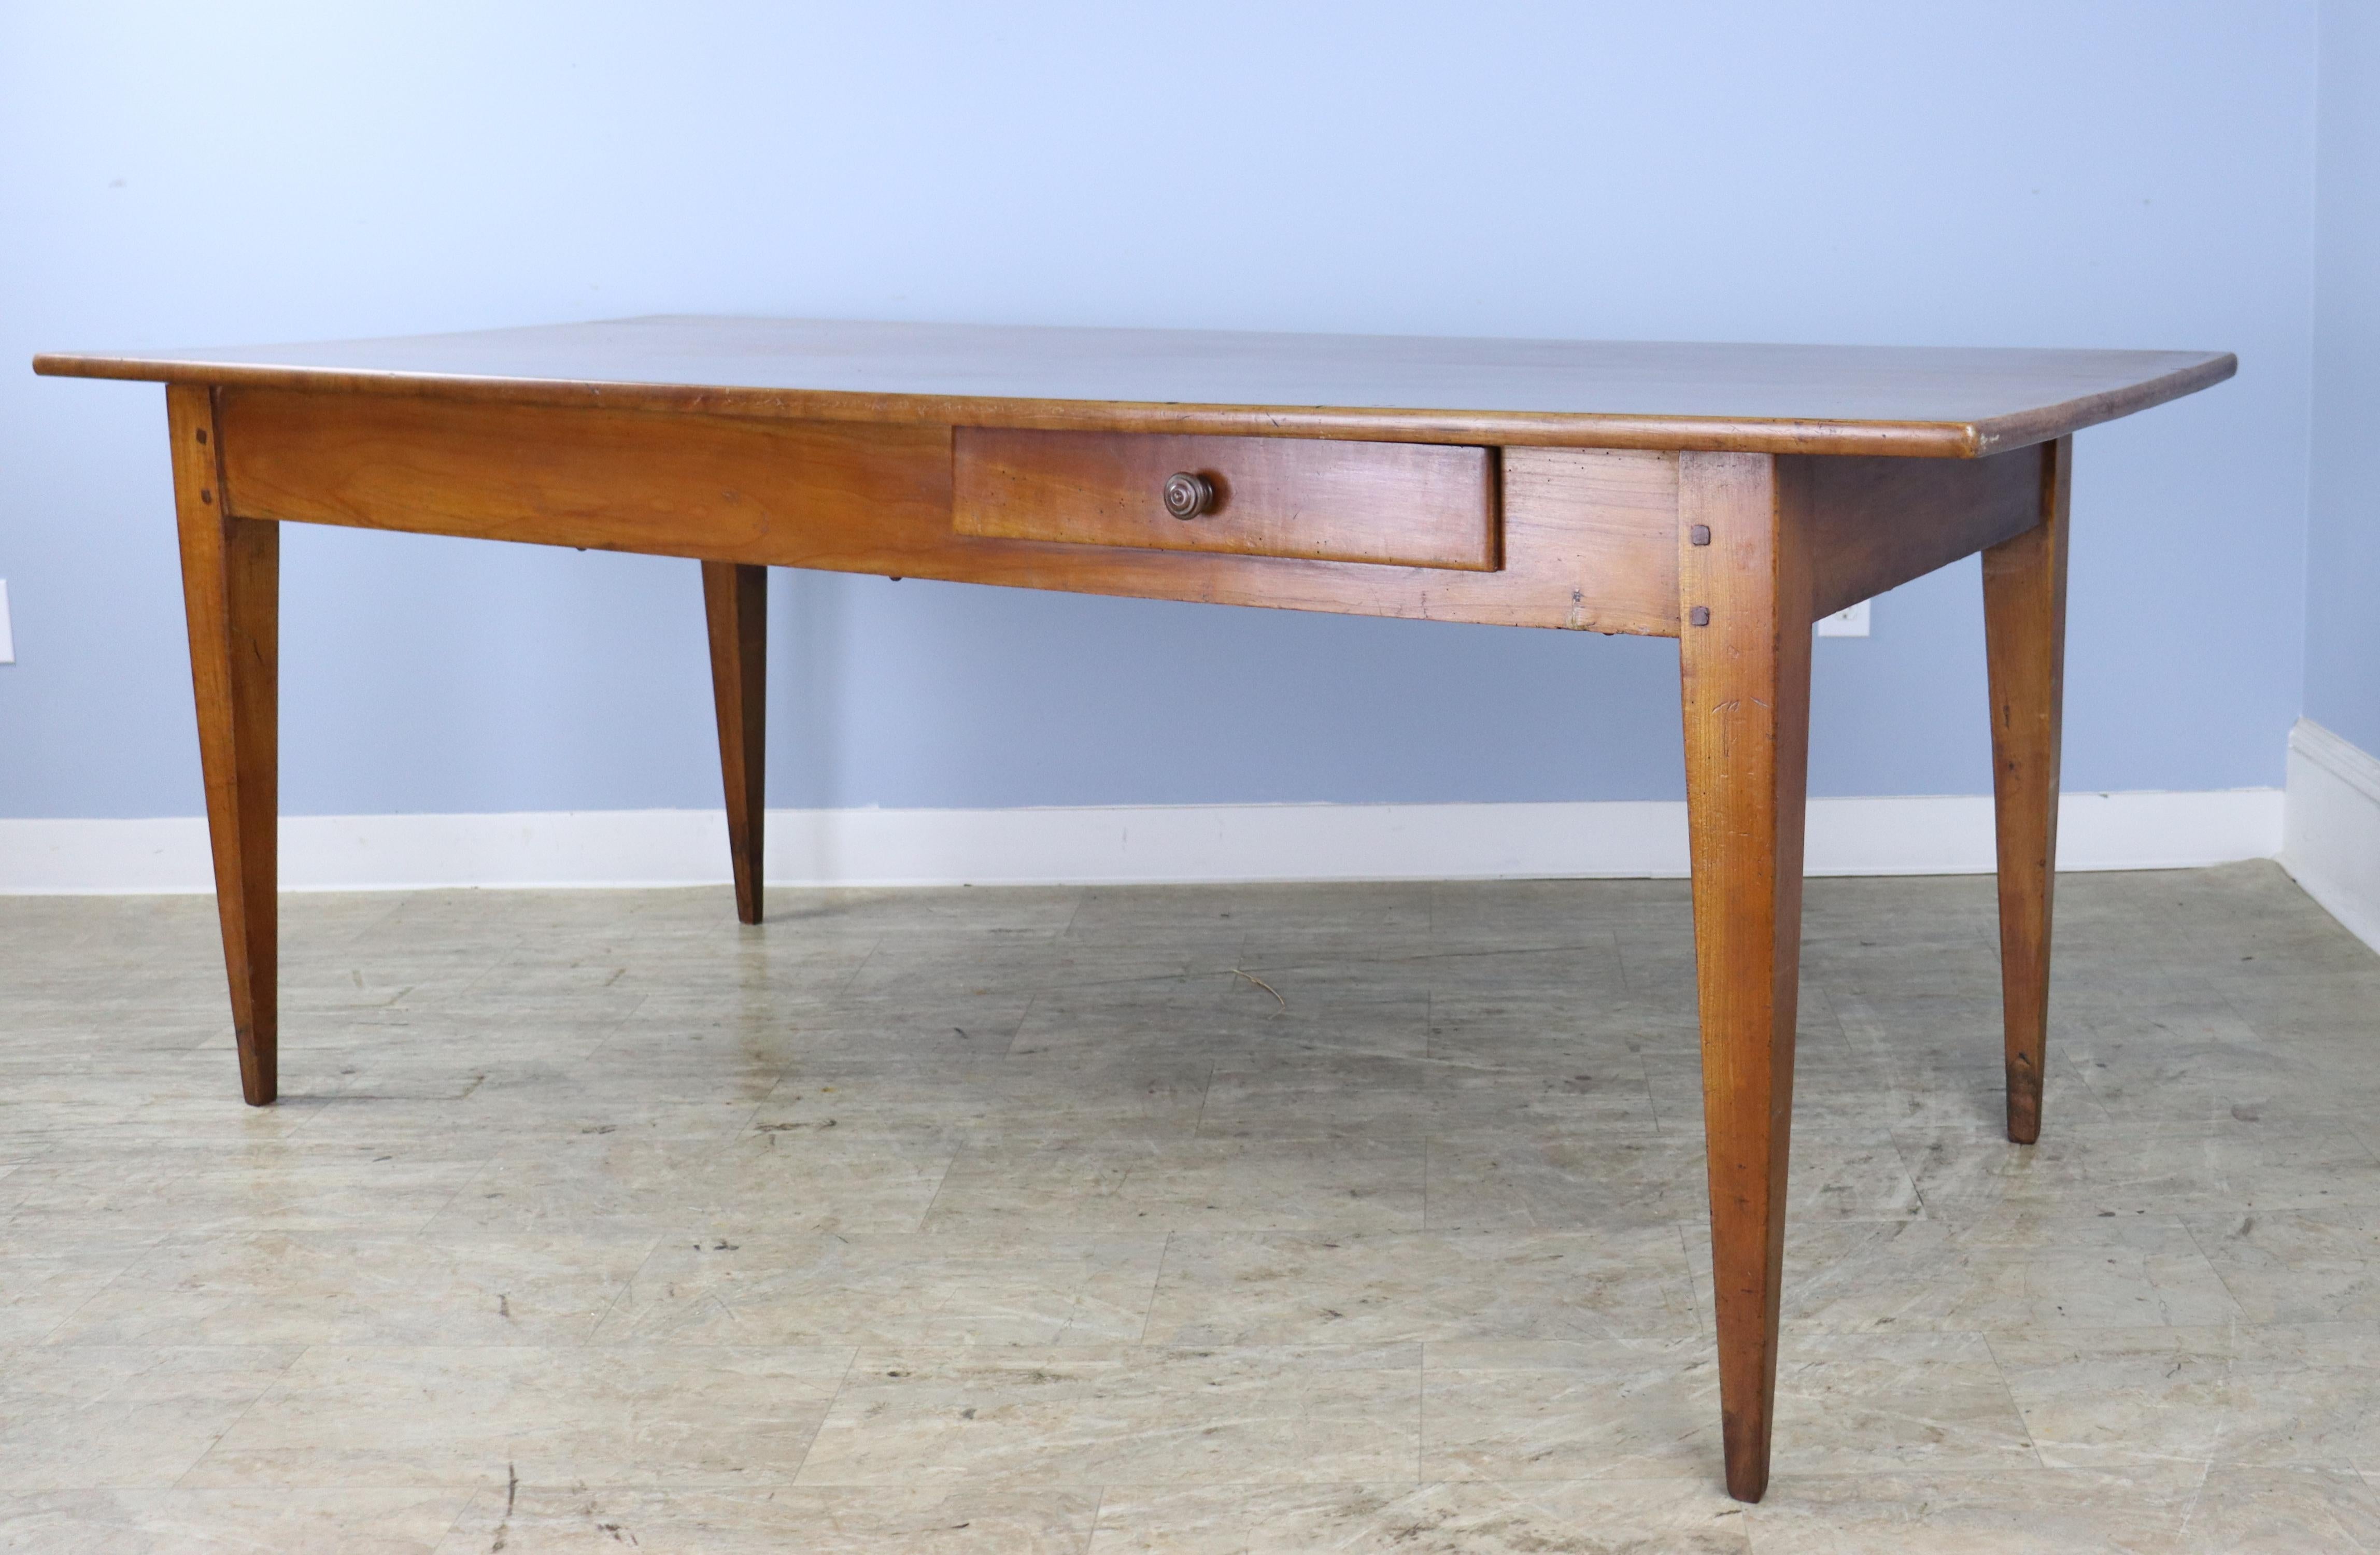 Antique Cherry Farm or Dining Table with Large Breadslide In Good Condition For Sale In Port Chester, NY